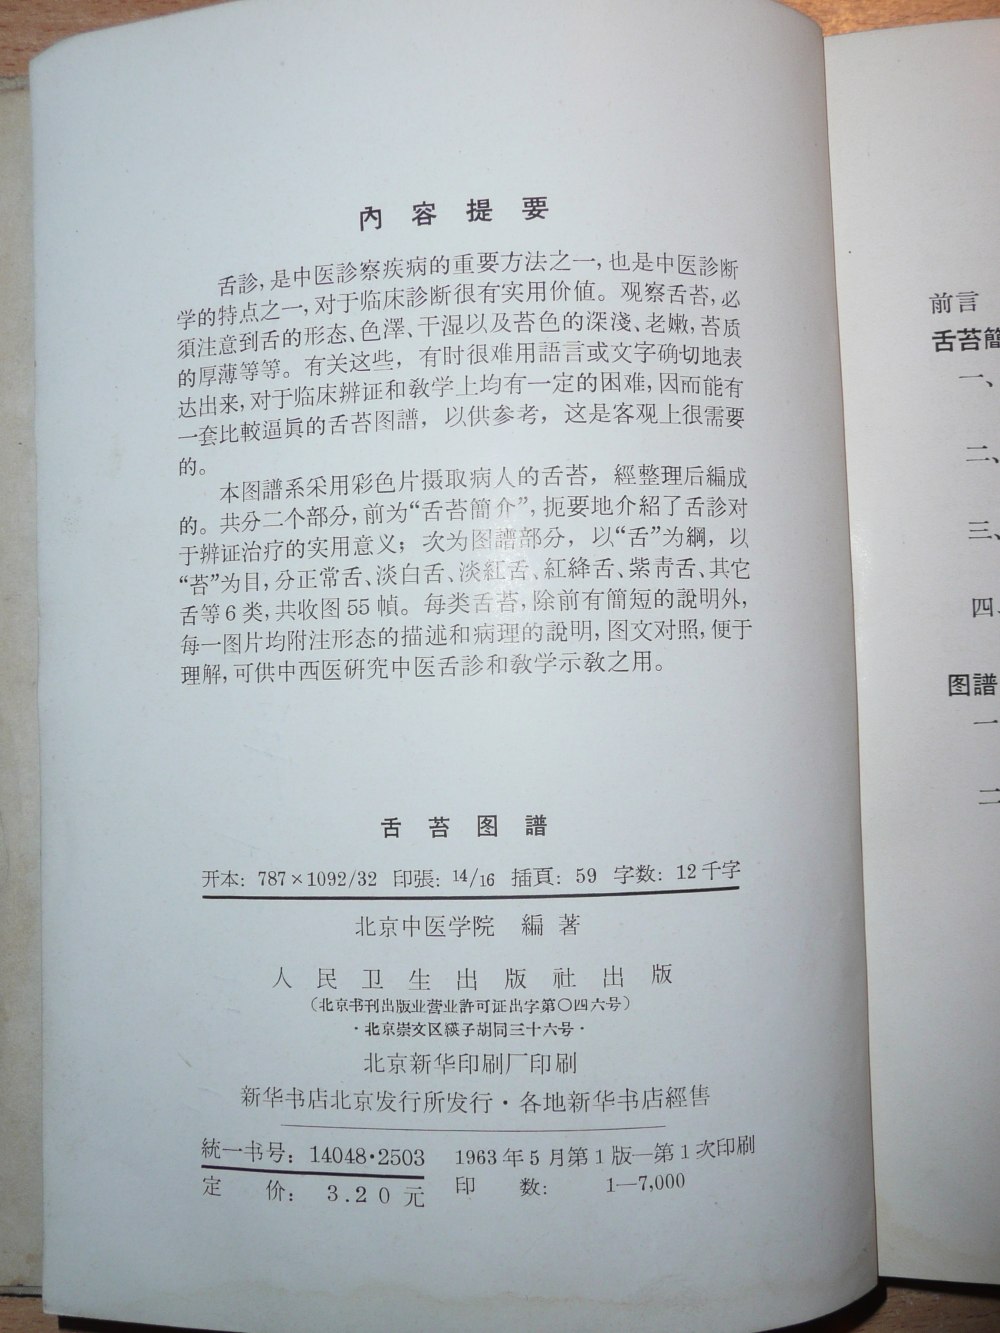 The description page of the 1963 edition of the "Tongue fur Illustrated Manual"